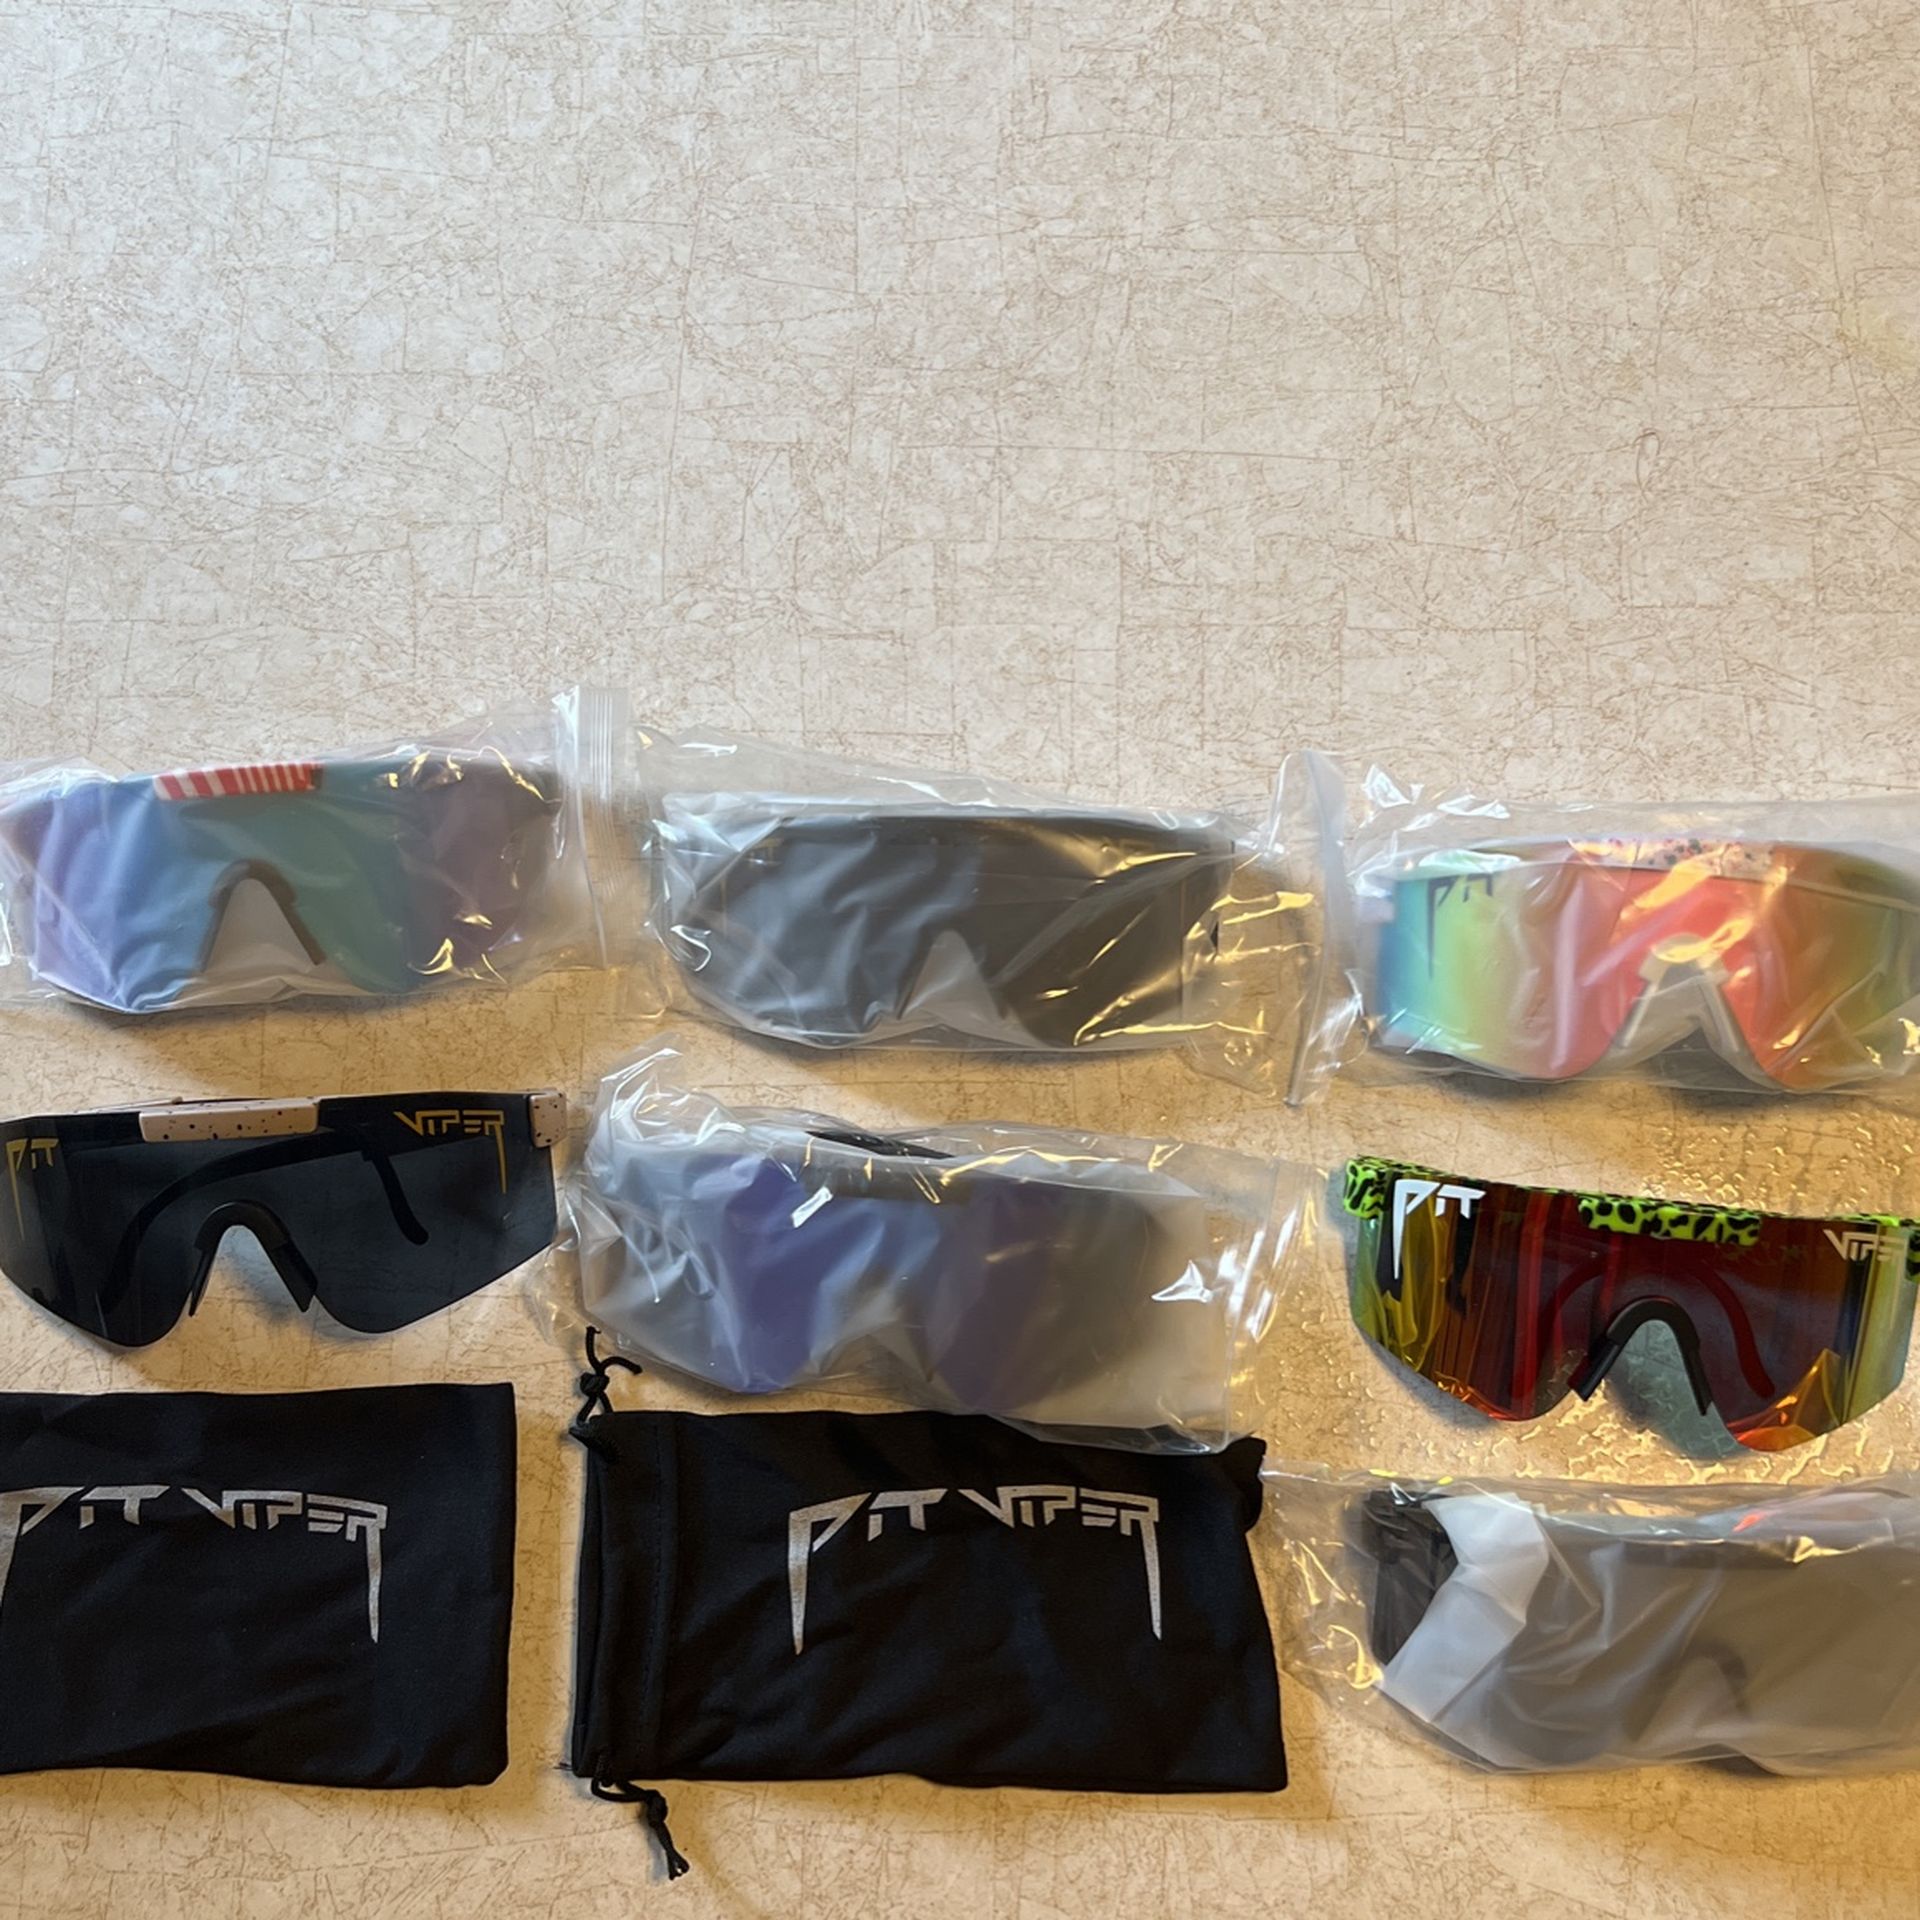 Pit Vipers/sunglasses 